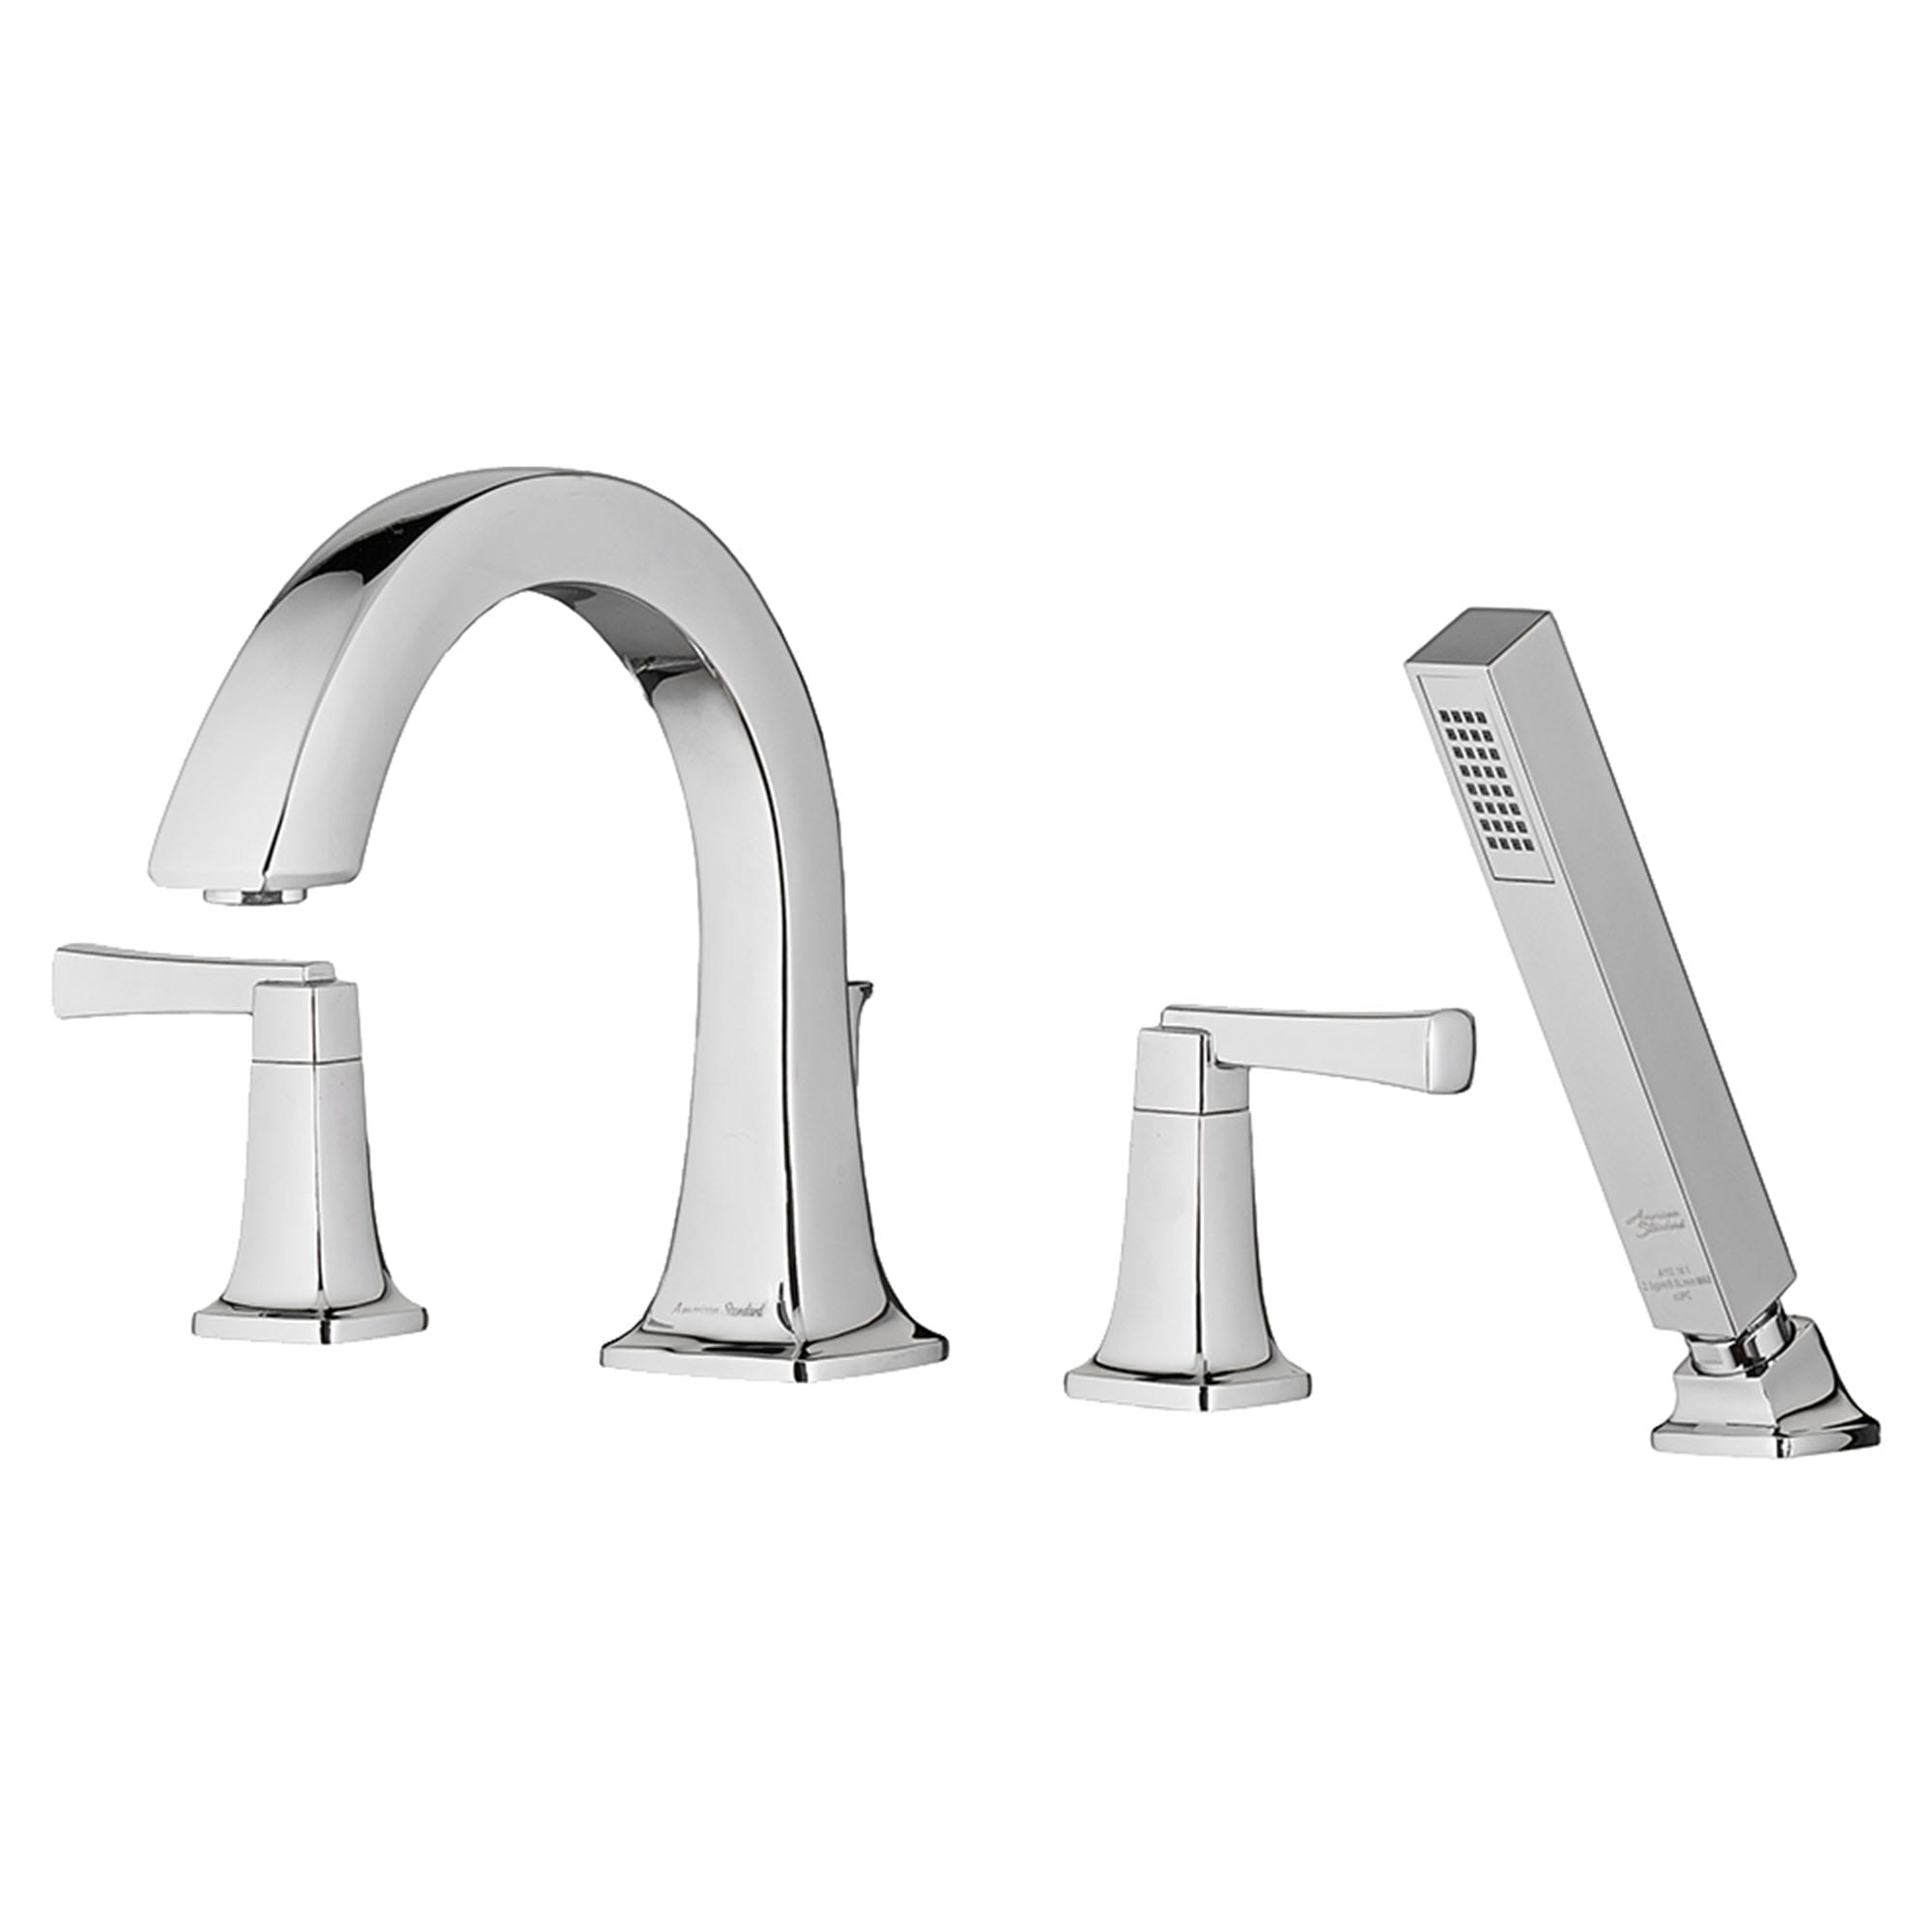 Townsend Bathtub Faucet With Lever Handles and Personal Shower for Flash Rough In Valve CHROME